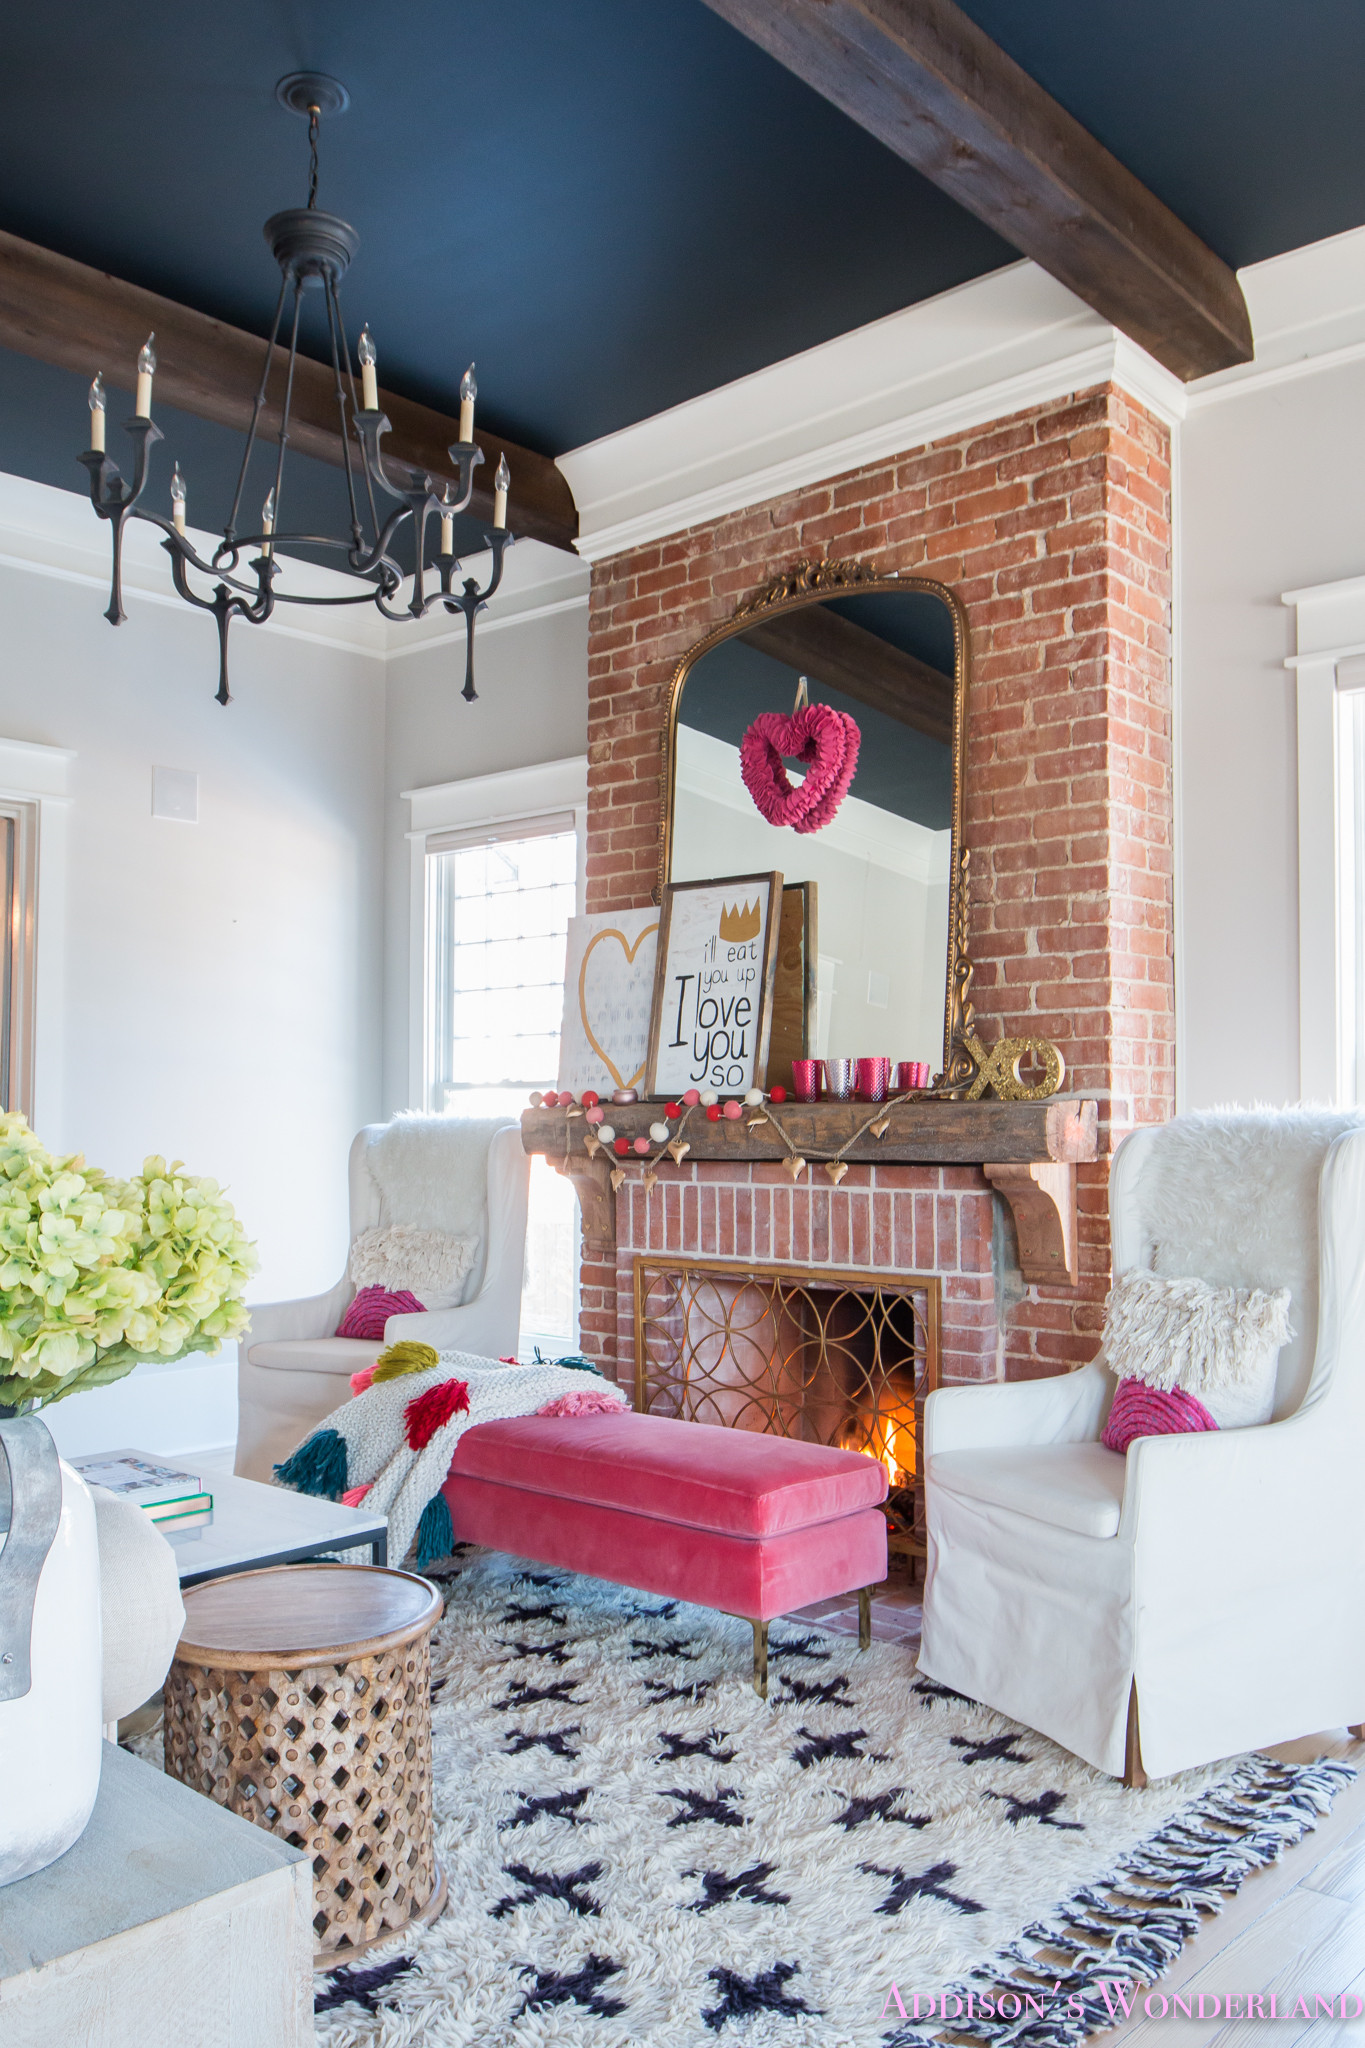 Living Room Decorating Ideas Pictures
 Our Colorful Whimsical & Elegant Valentine s Day Living